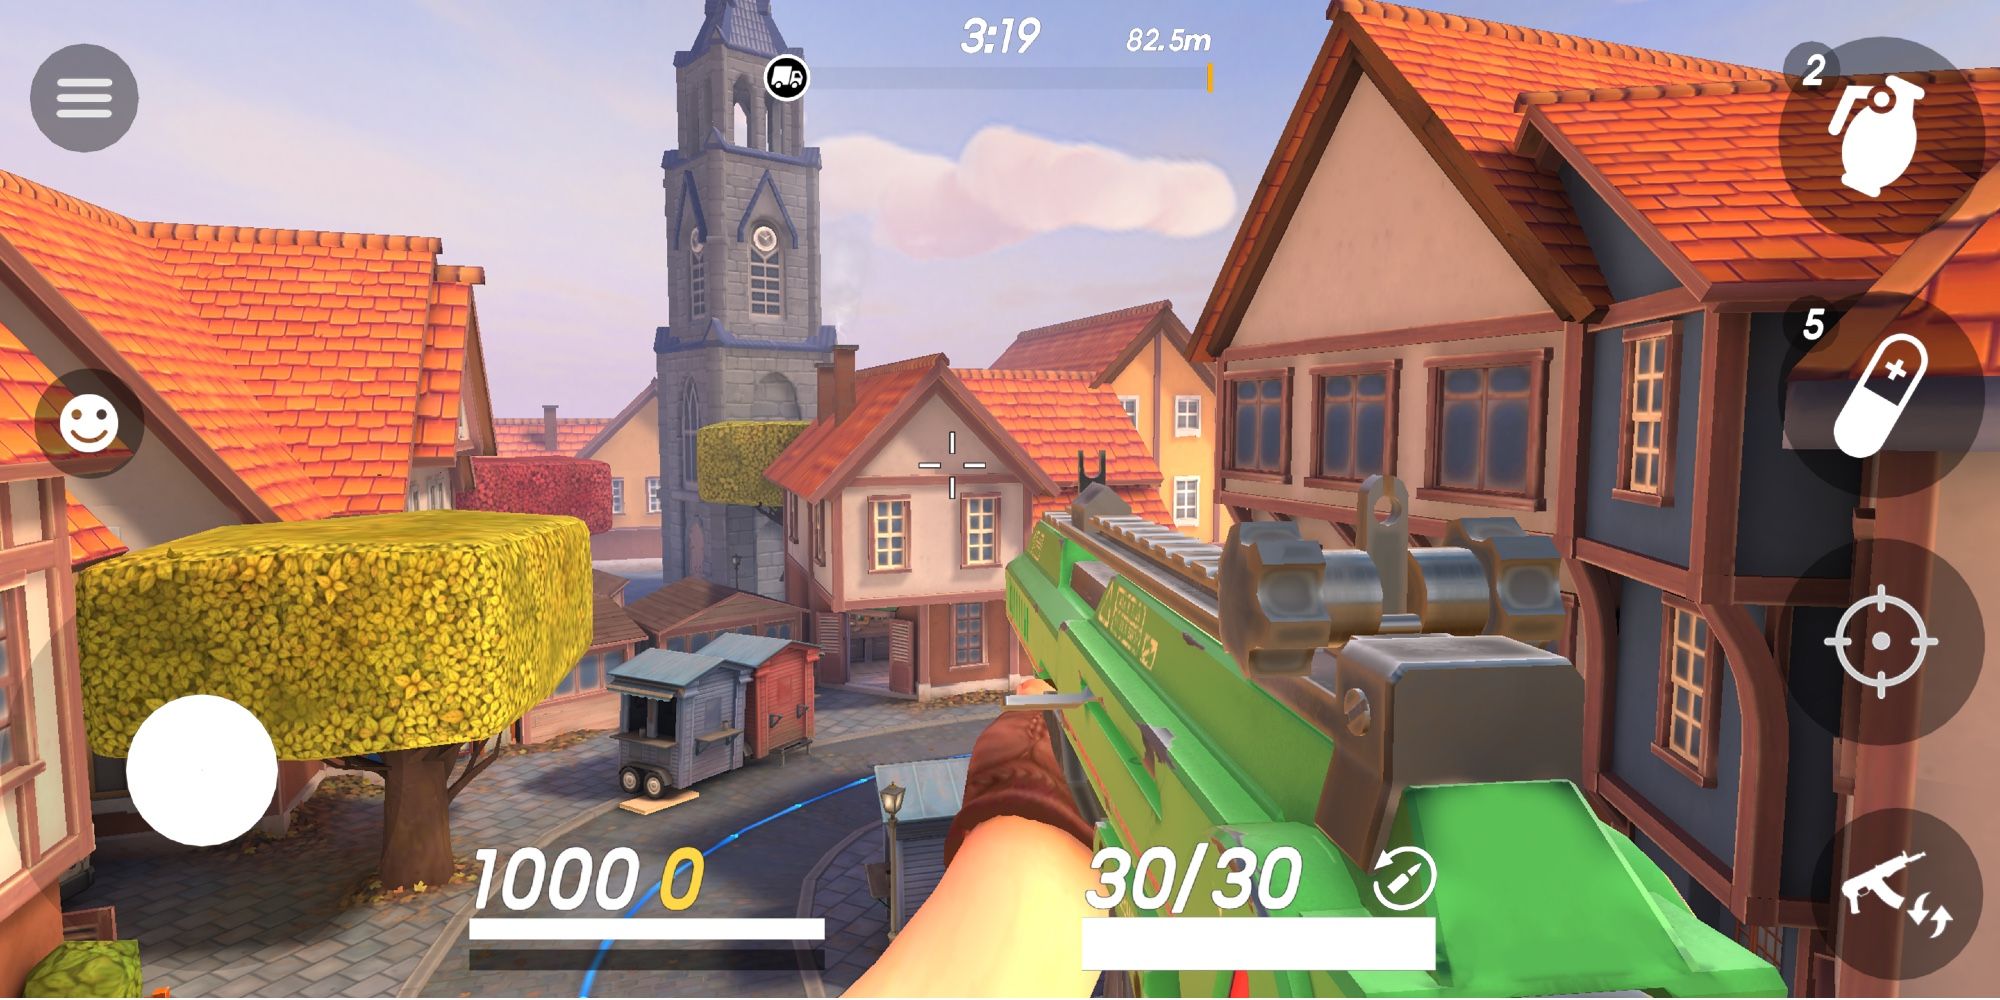 Best FPS Games on Mobile - Guns of Boom - Player hunts for enemies in a vibrant map